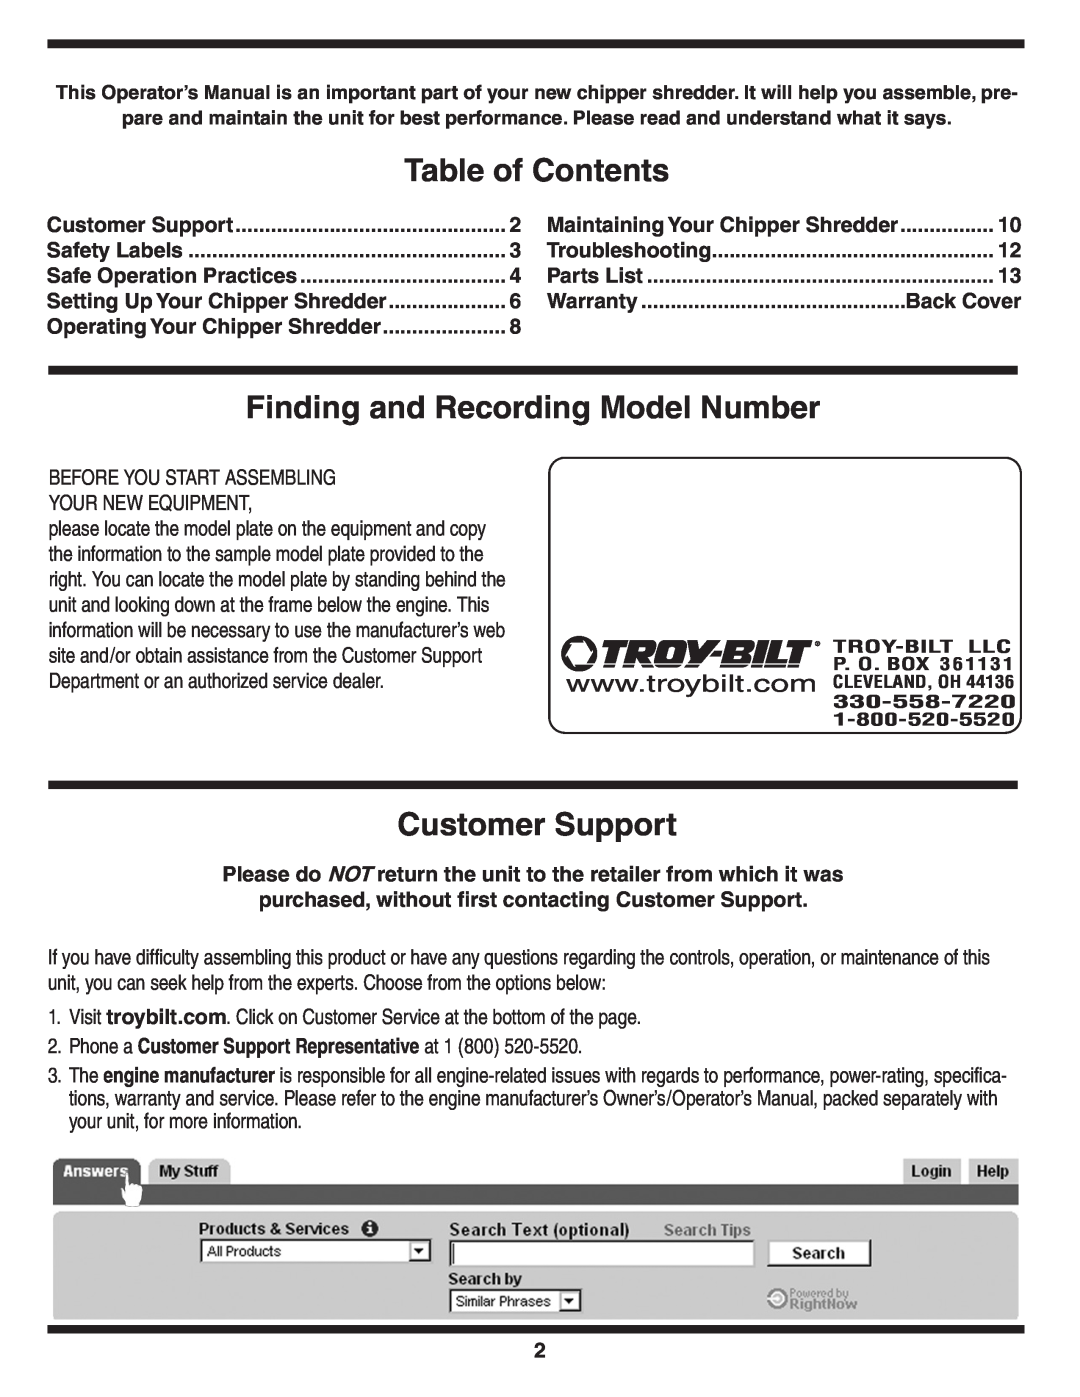 Troy-Bilt 410, 420 Table of Contents, Finding and Recording Model Number, Customer Support, Safety Labels, Warranty 